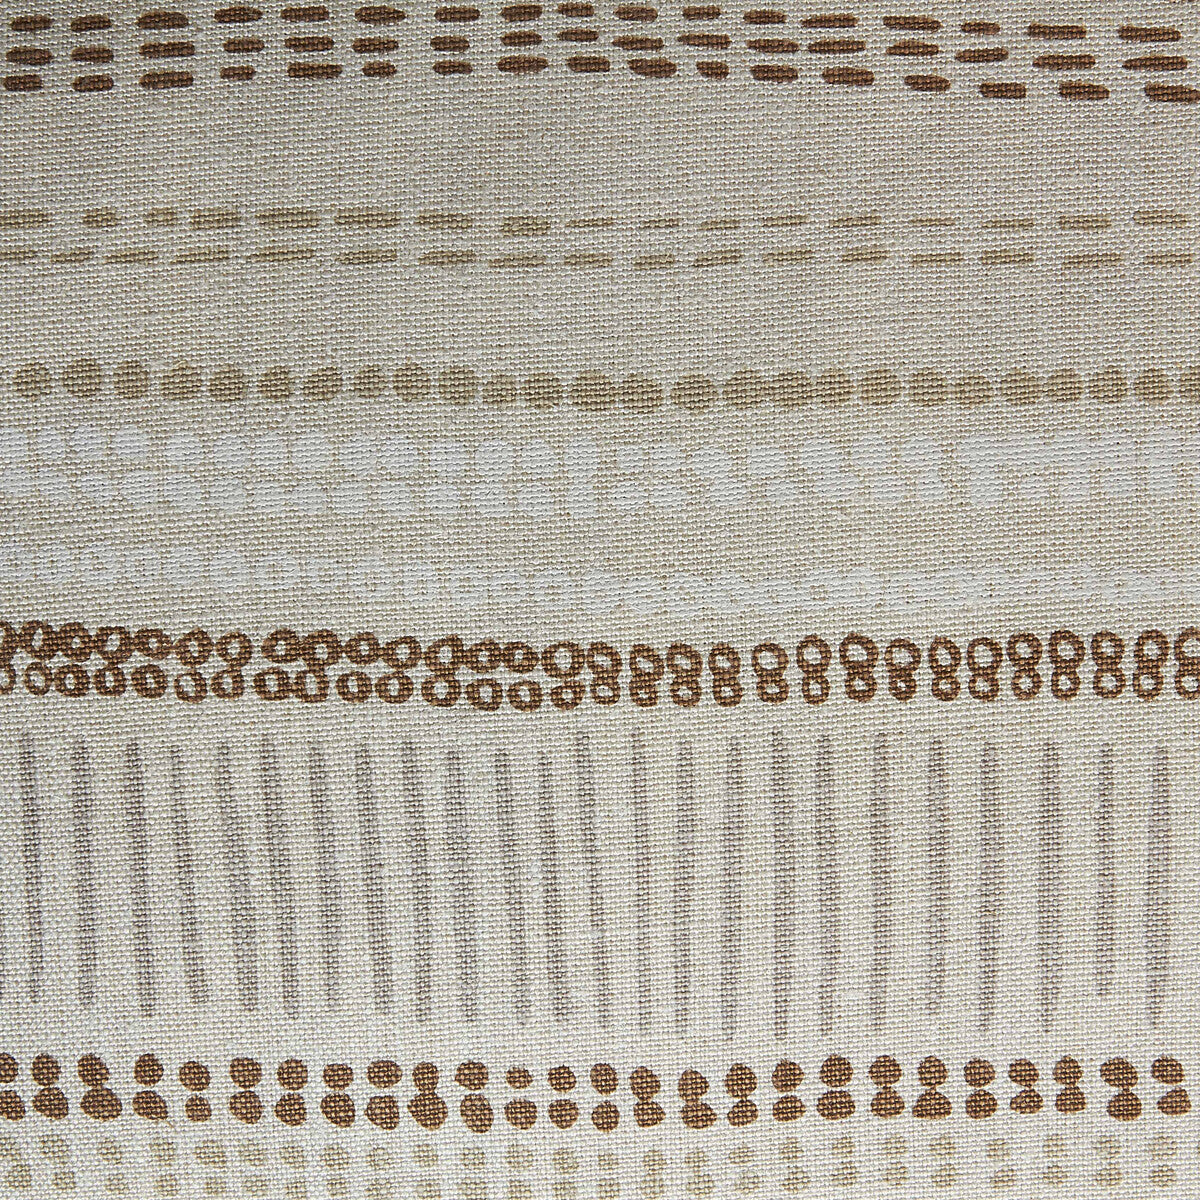 Saybrook fabric in brwn/taupe/g color - pattern BFC-3634.616.0 - by Lee Jofa in the Blithfield collection